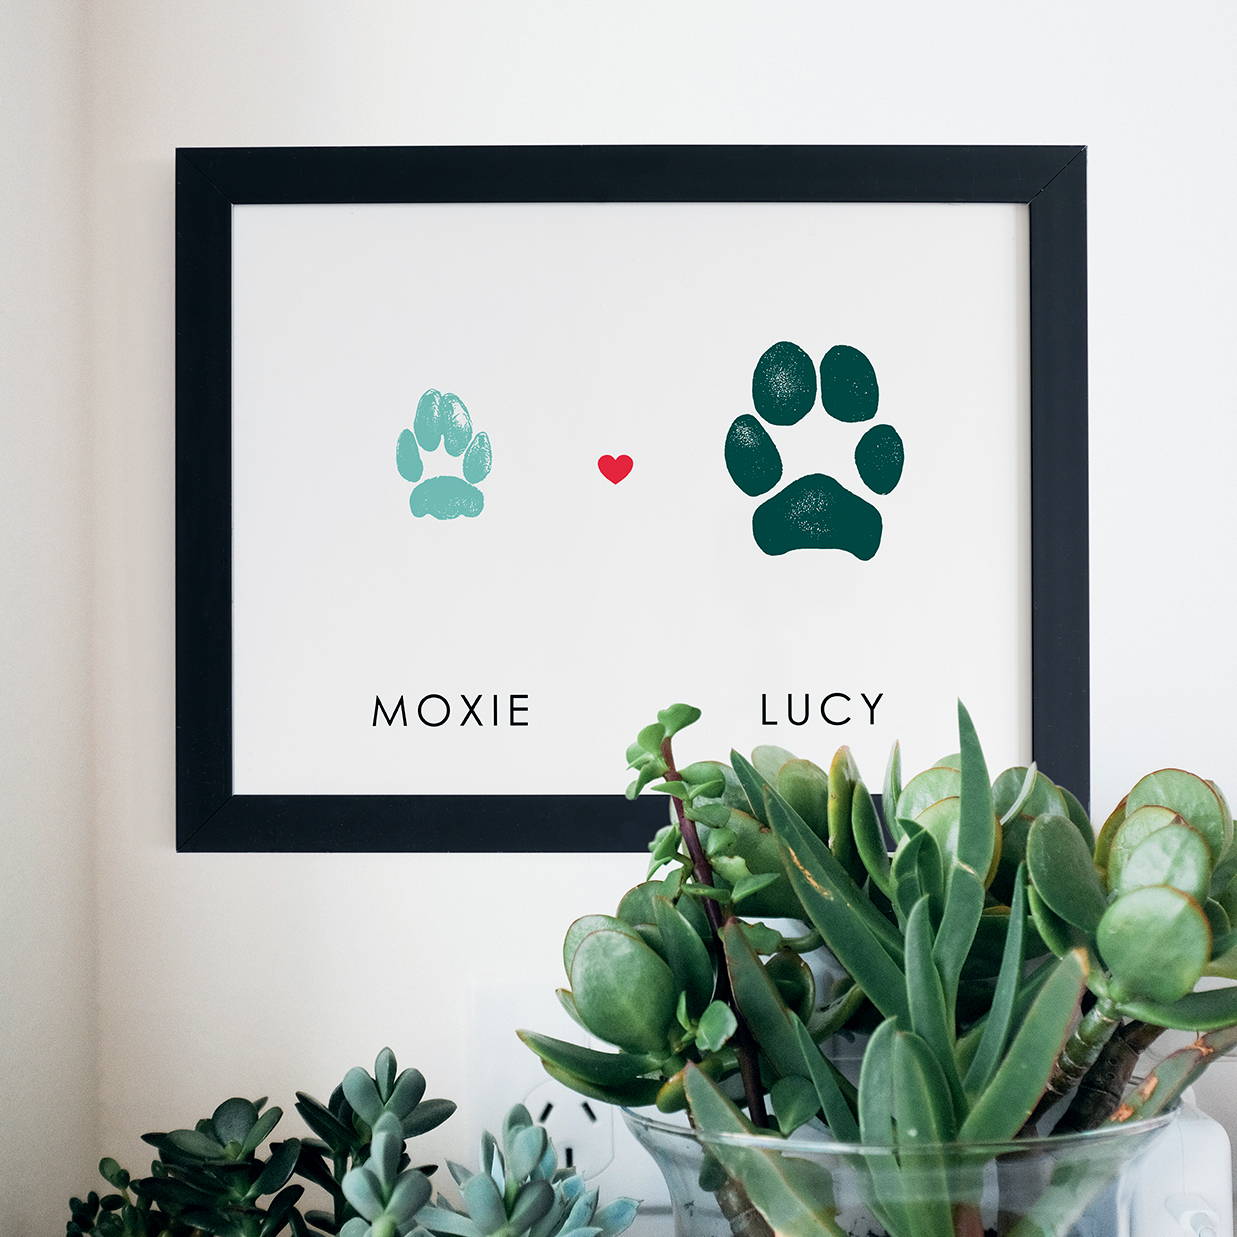 cats paw print and dogs paw print impressions on wall in frame